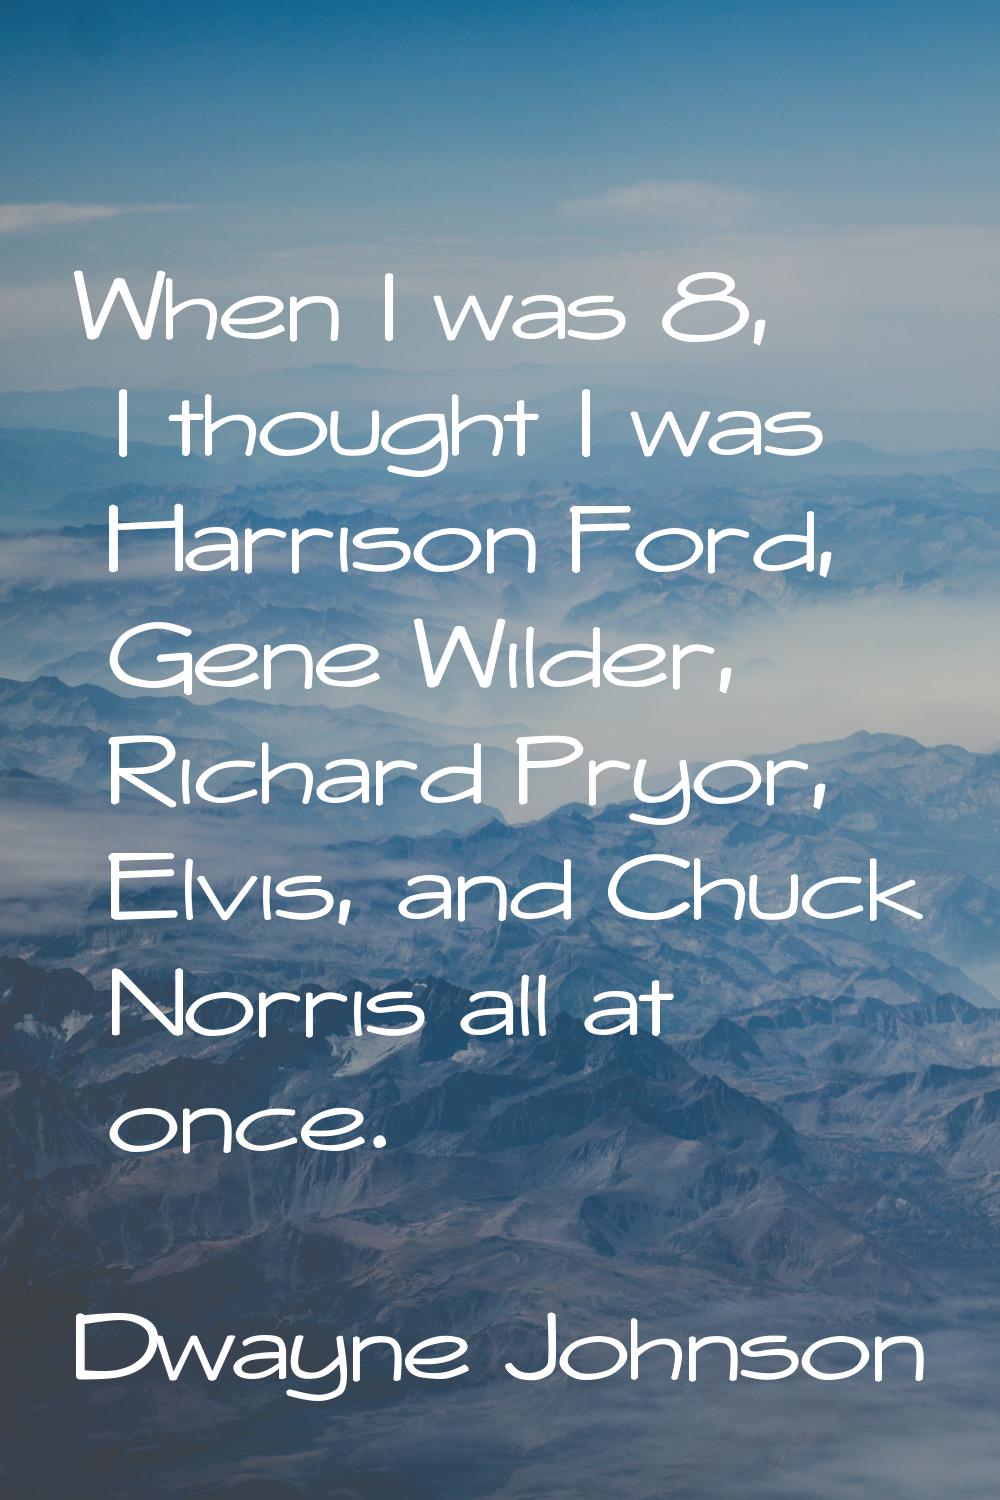 When I was 8, I thought I was Harrison Ford, Gene Wilder, Richard Pryor, Elvis, and Chuck Norris al